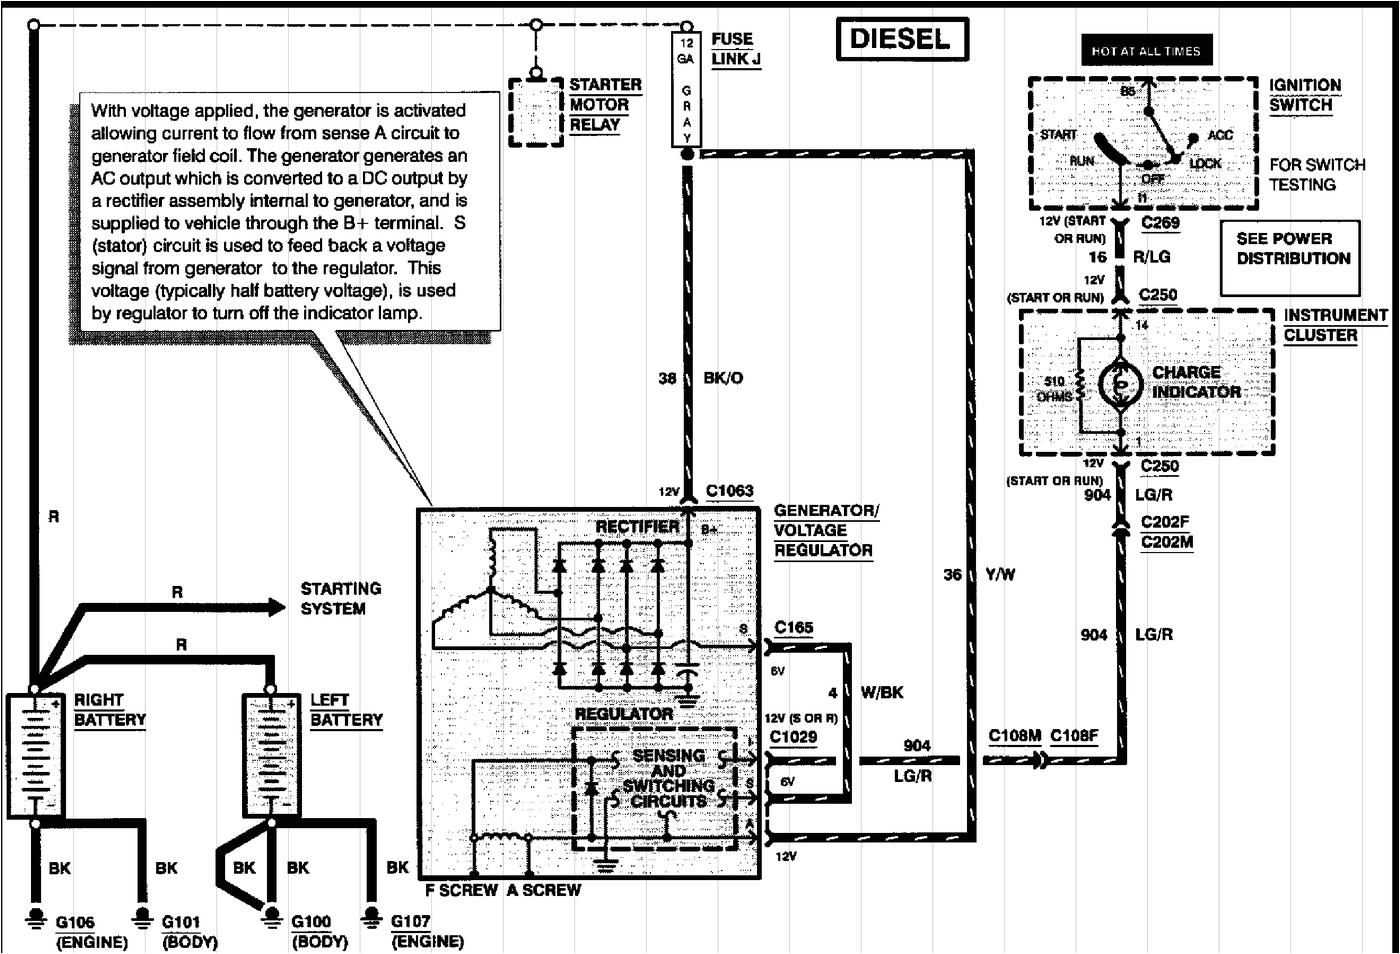 1997 ford f250 wiring diagram just wiring diagram i need a wiring diagram for a 97